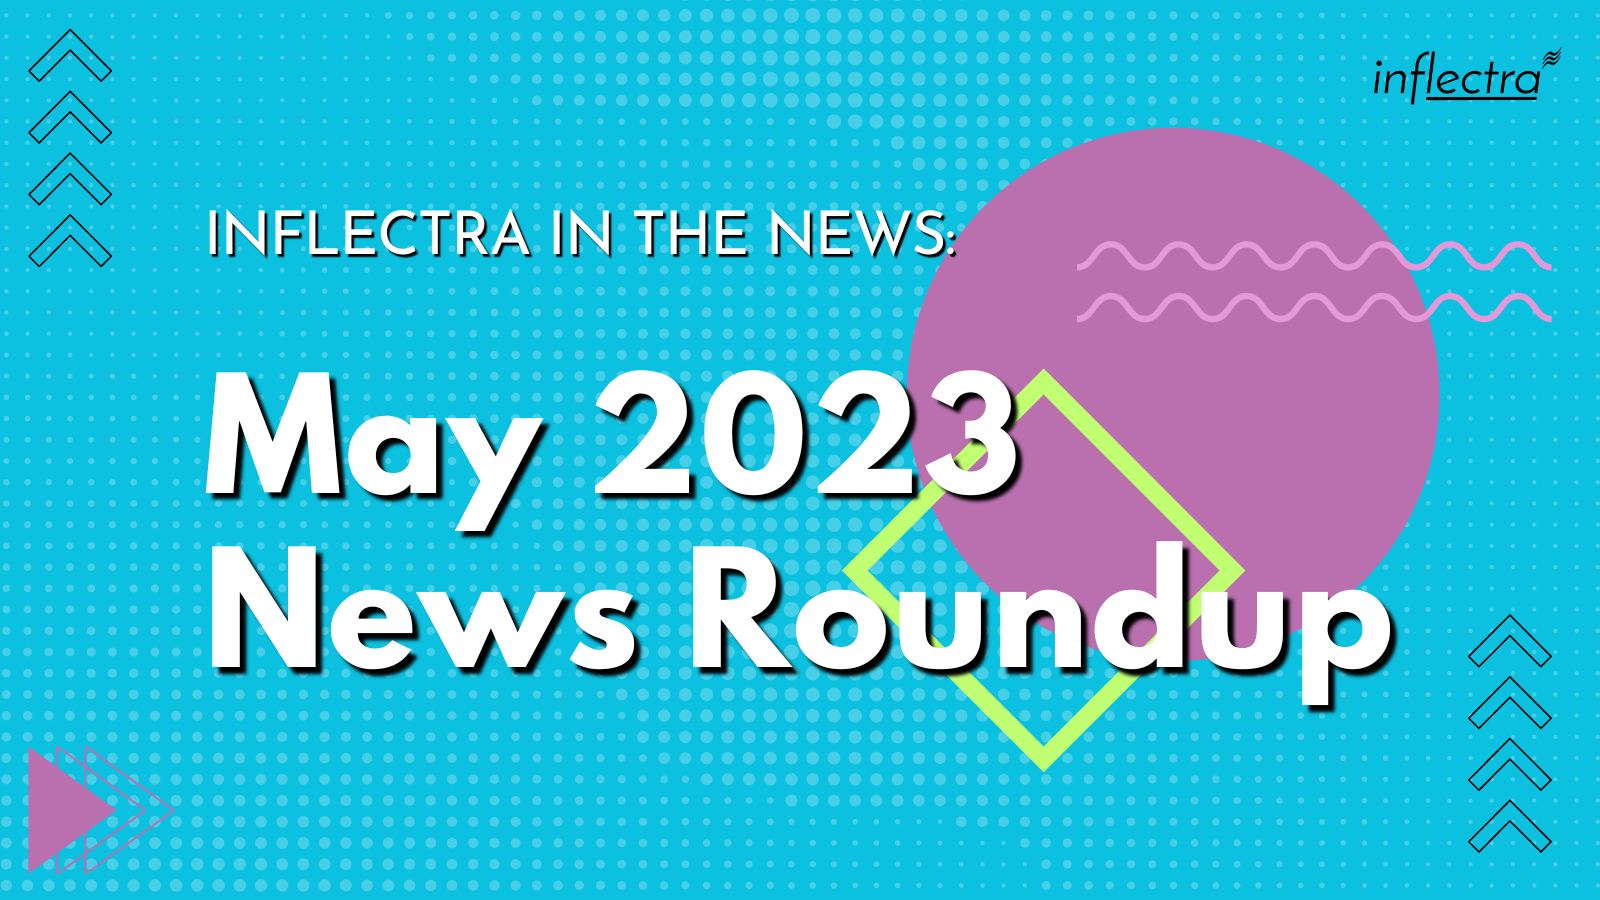 inflectra-in-the-news-may-roundup-image